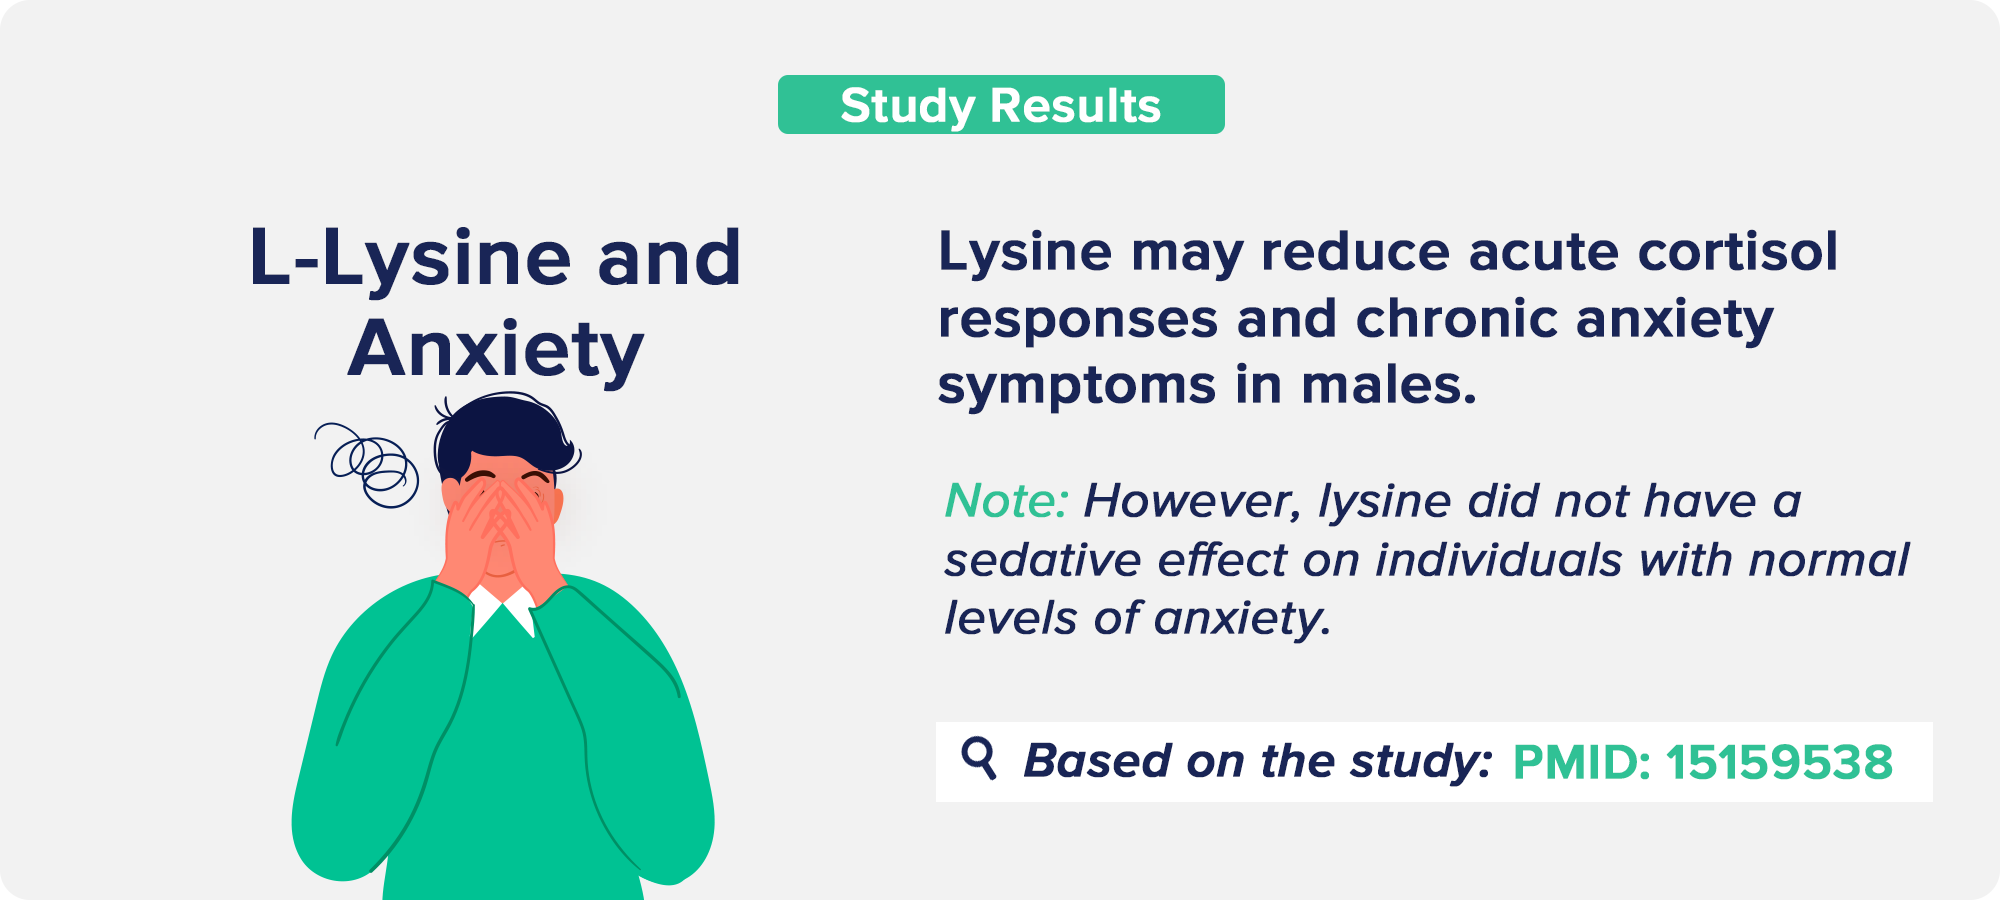 L-Lysine and Anxiety